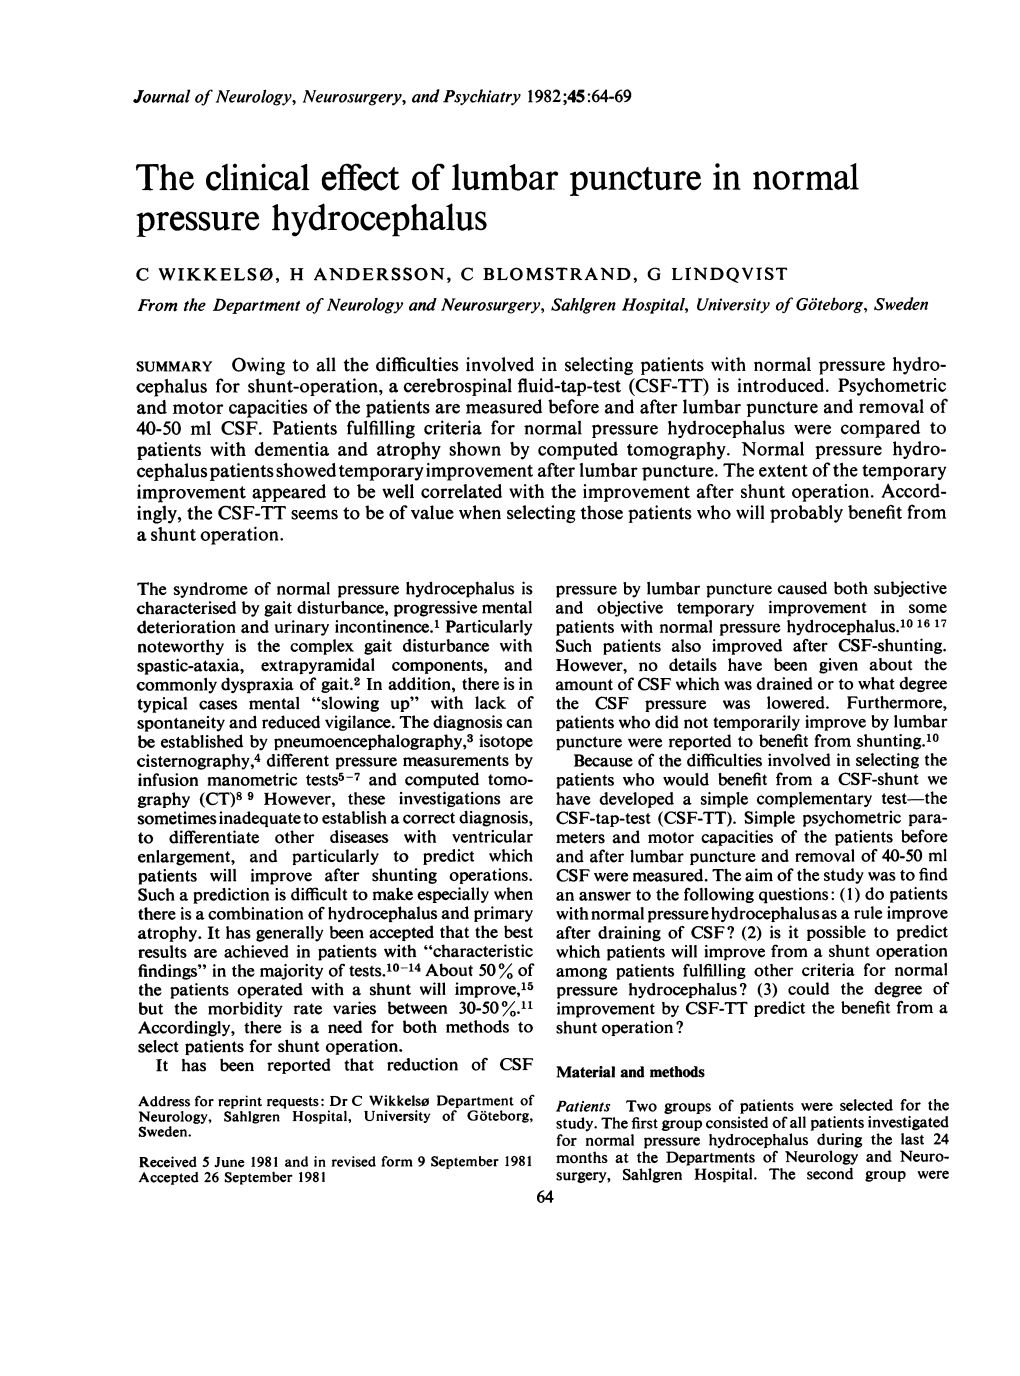 The Clinical Effect of Lumbar Puncture in Normal Pressure Hydrocephalus